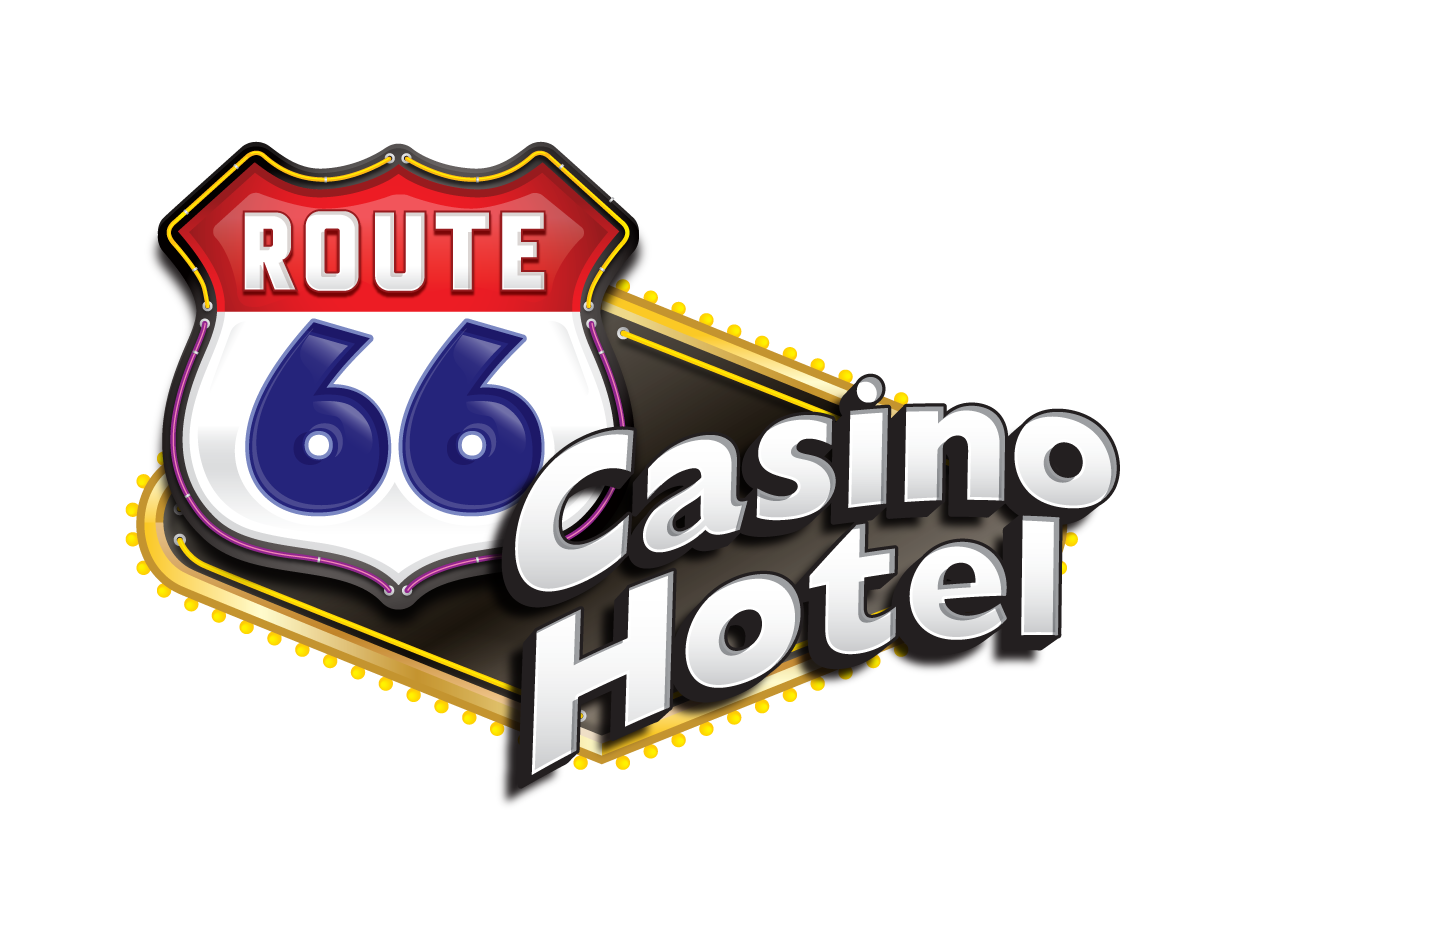 route 66 casino buffet 2 for 1